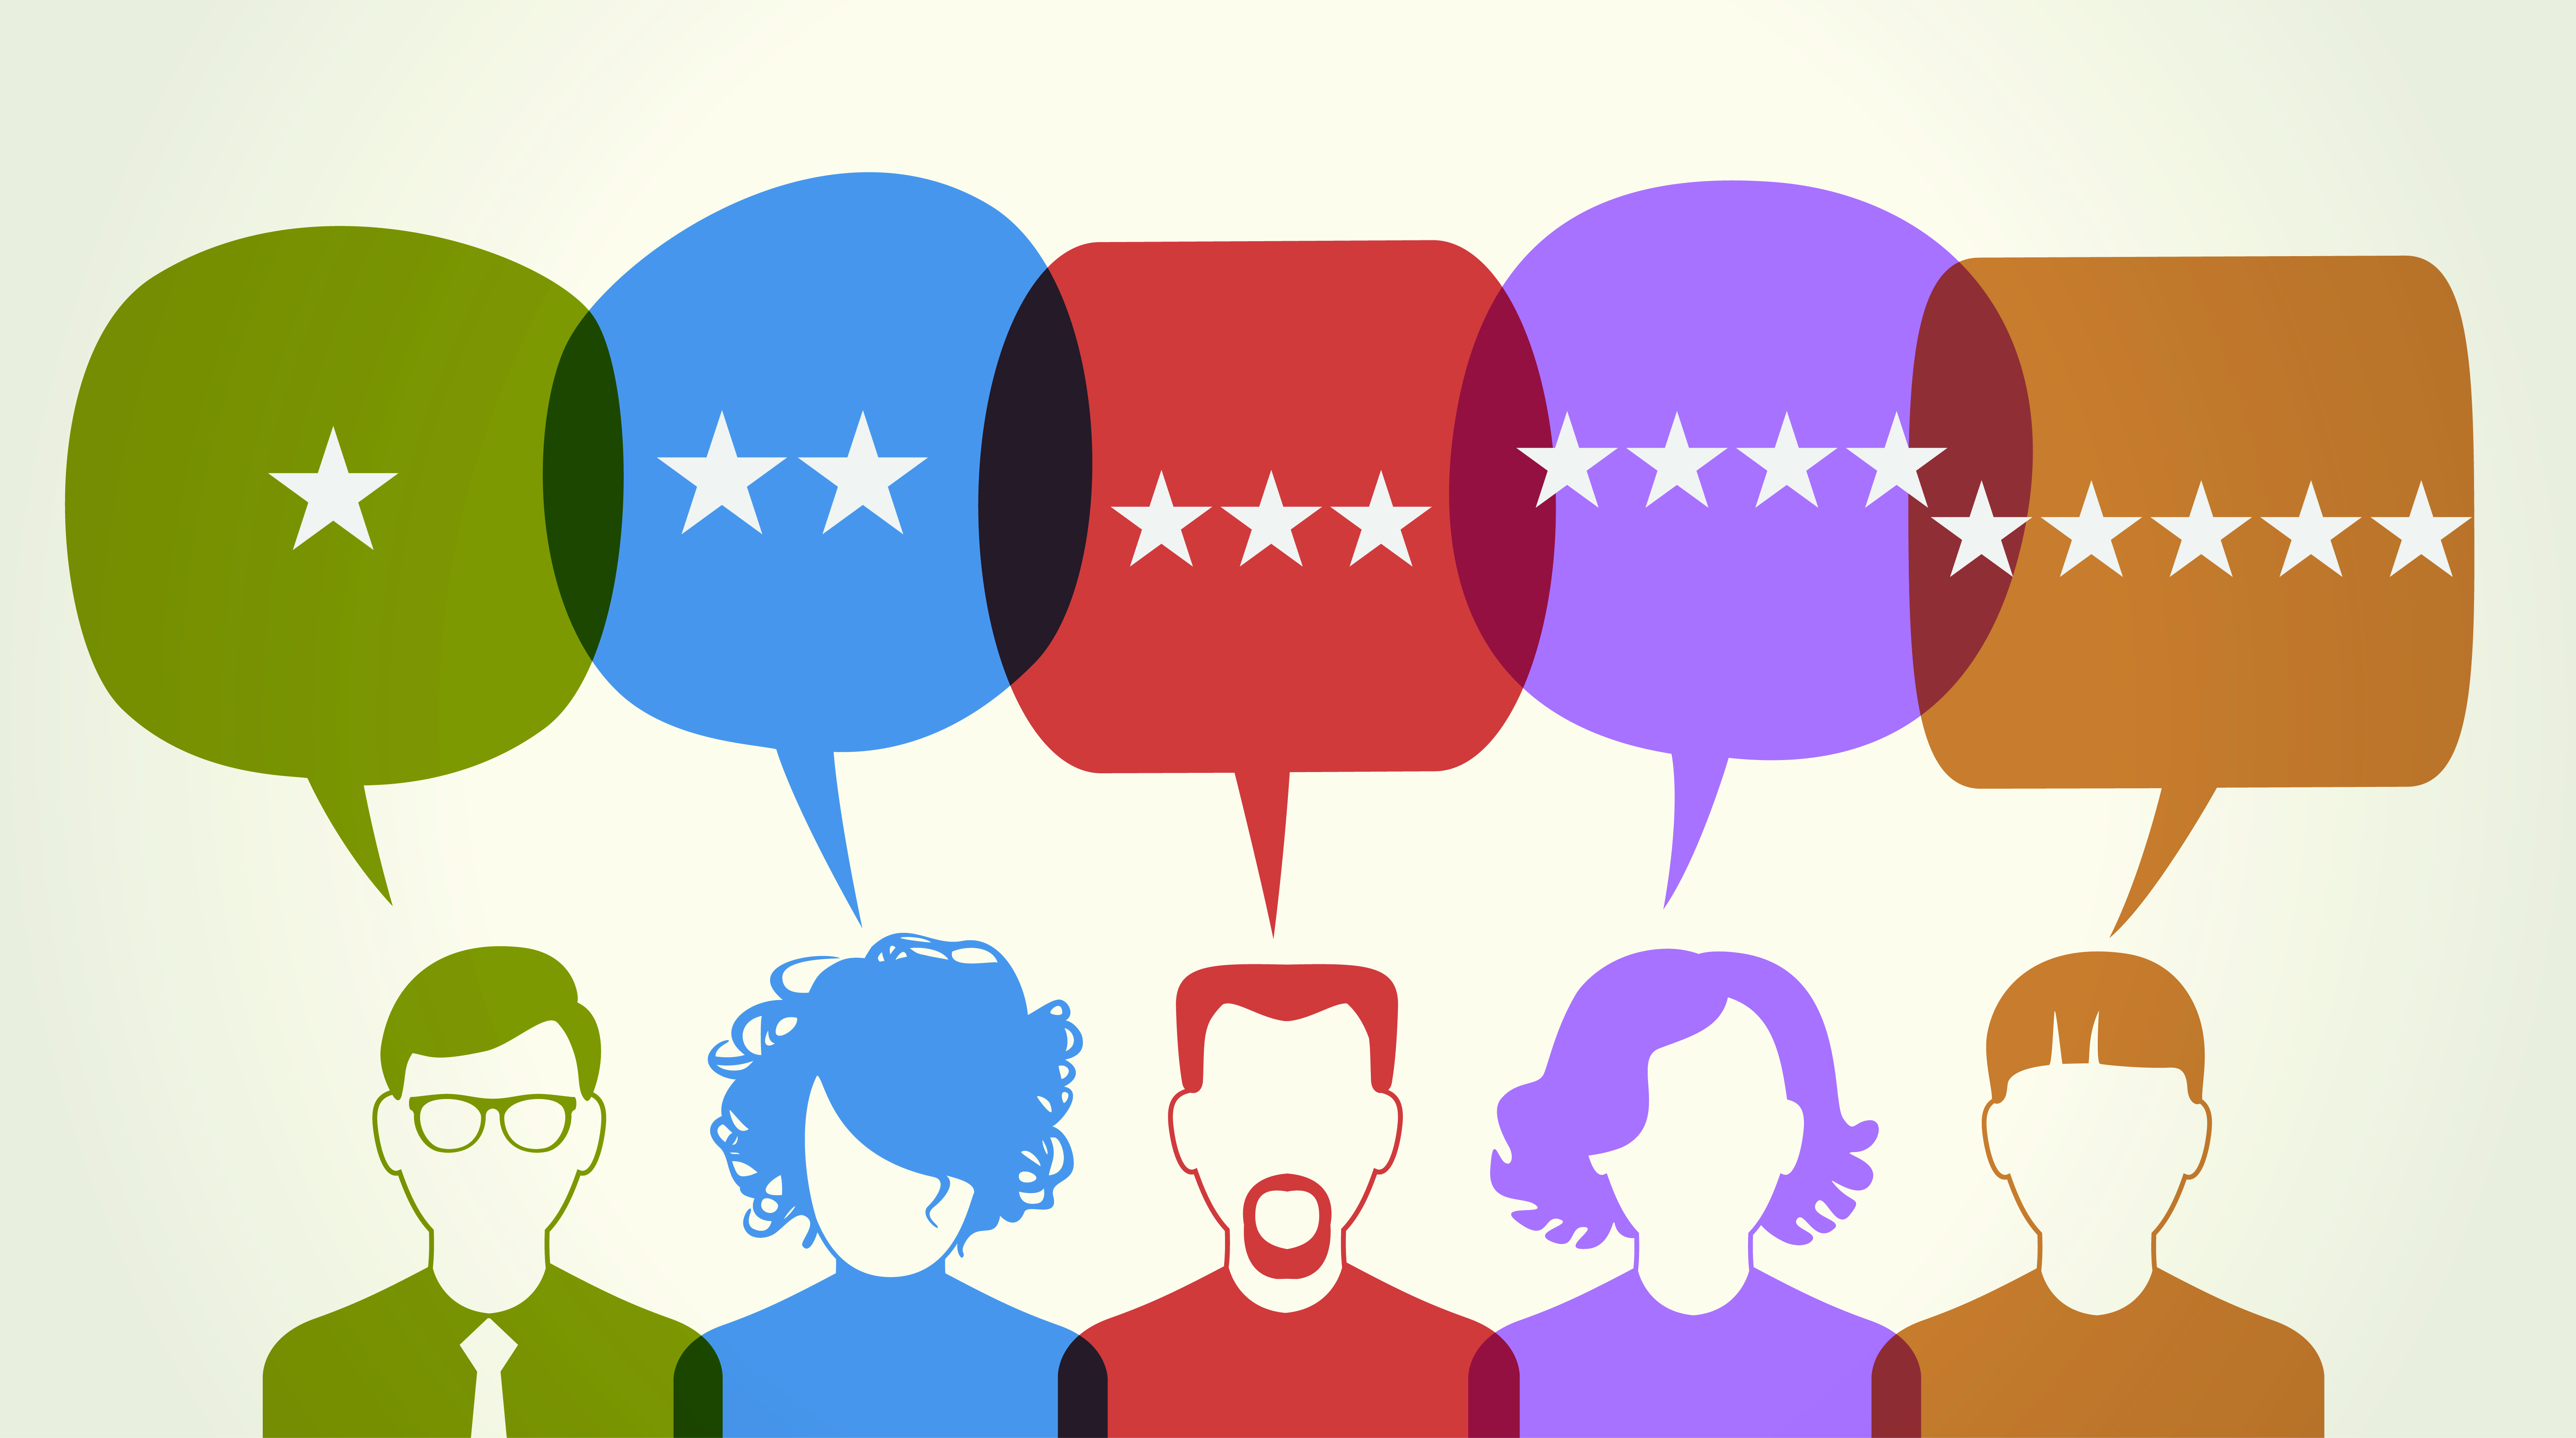 Online Reviews Become More Important With Recent Google Update - Next Ad Agency